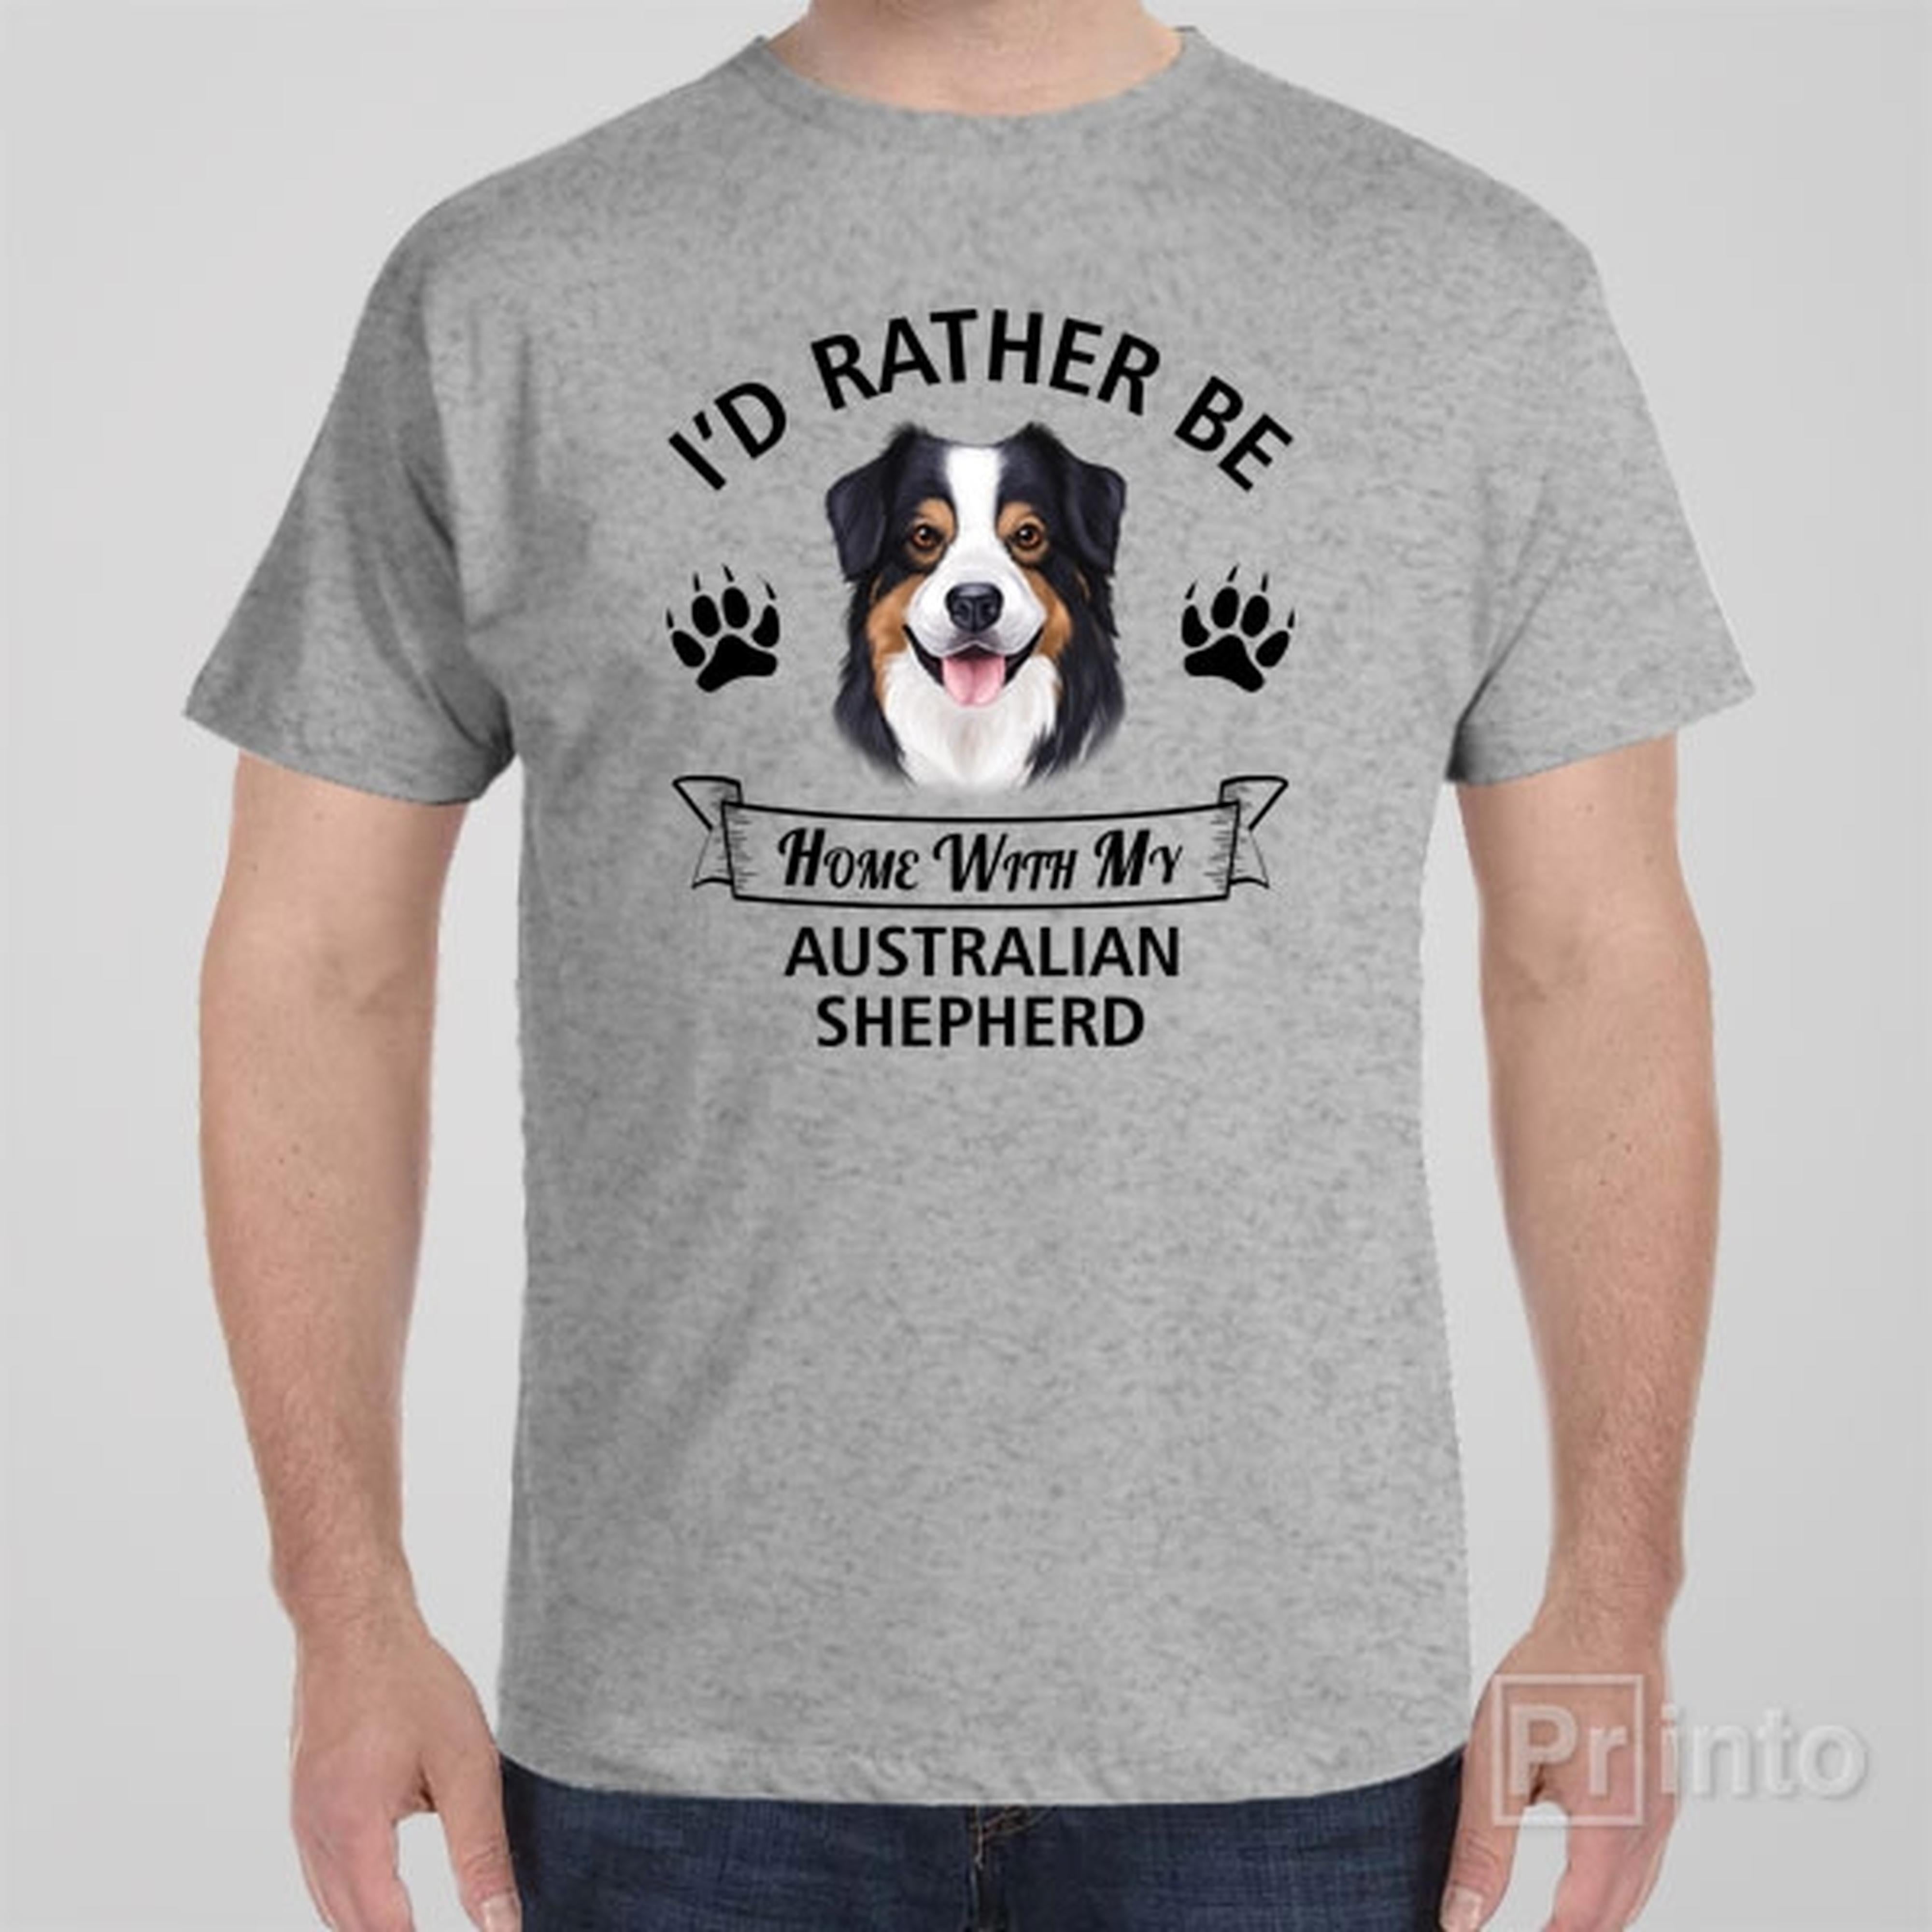 id-rather-stay-home-with-my-australian-shepherd-t-shirt